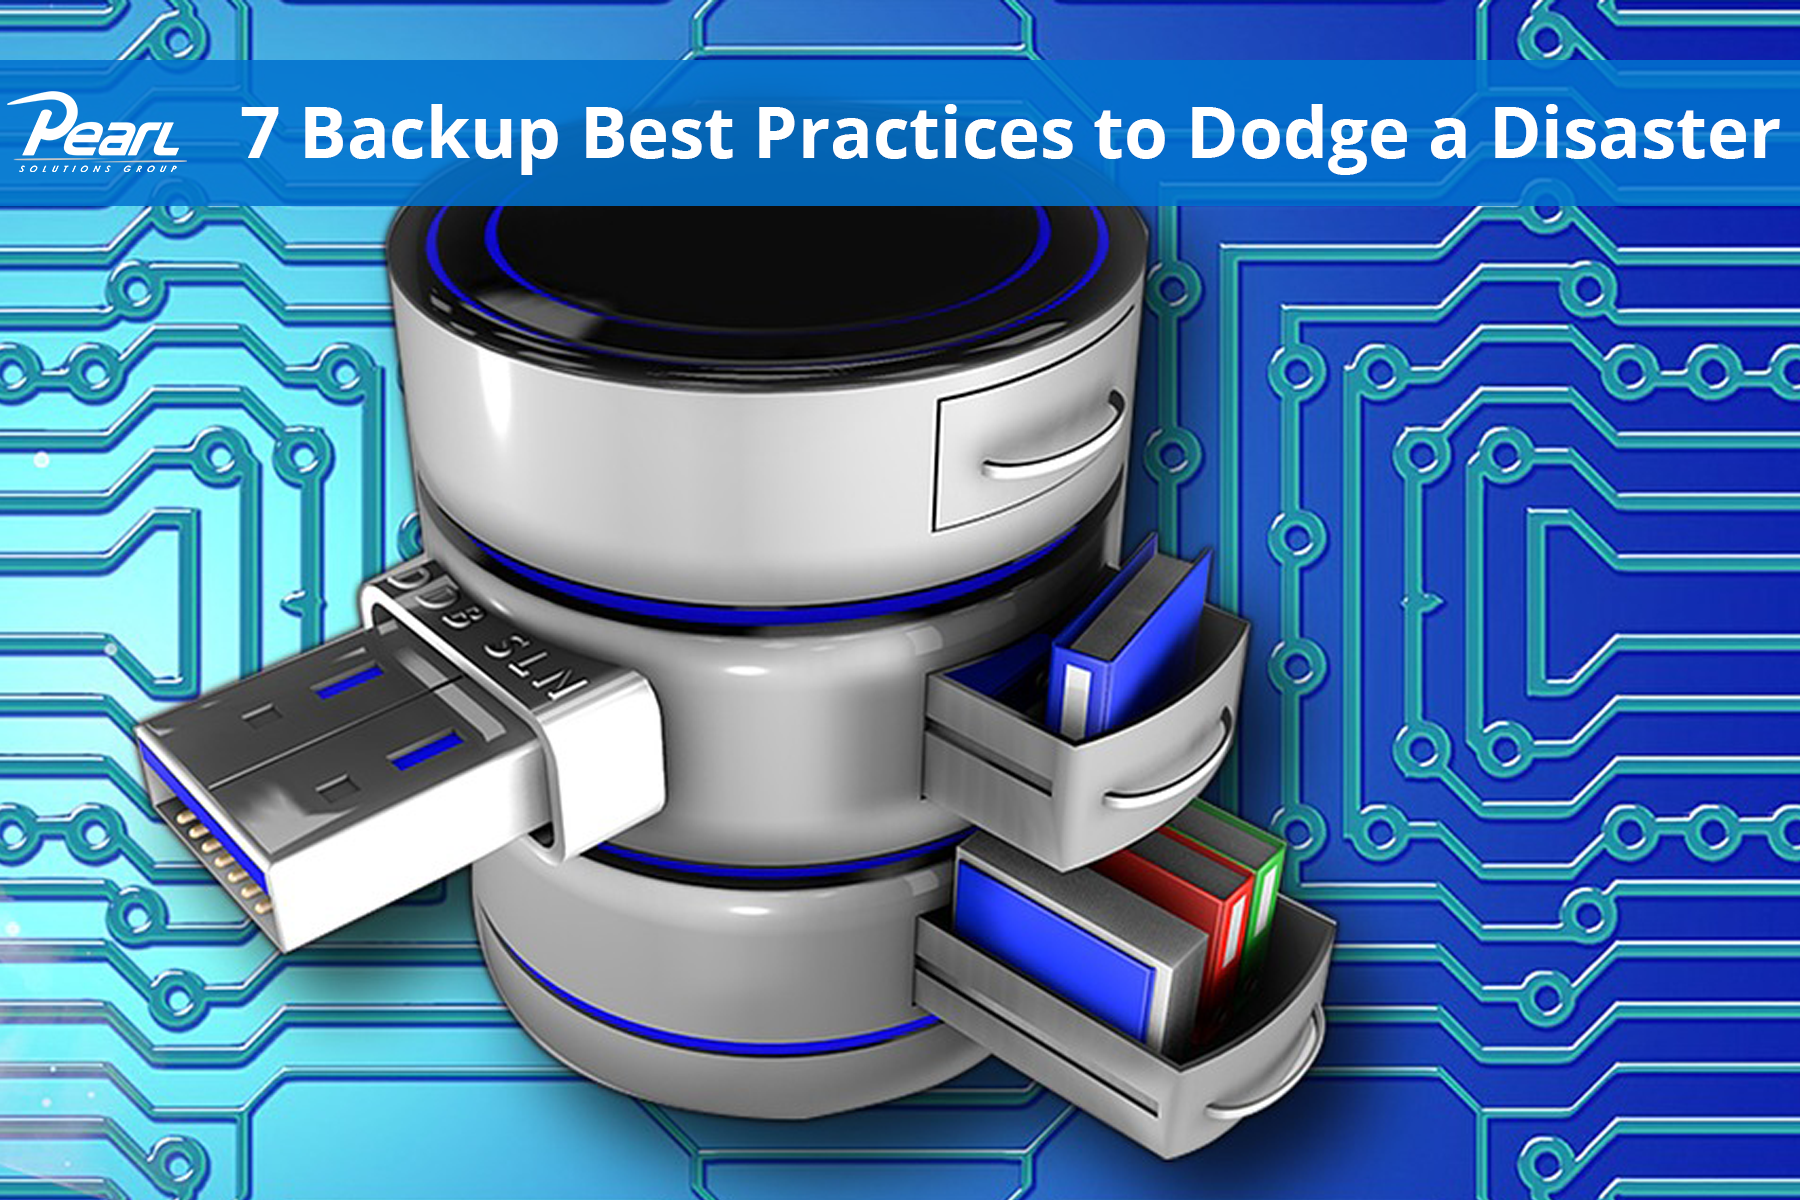 Backup Best Practices to Dodge a Disaster